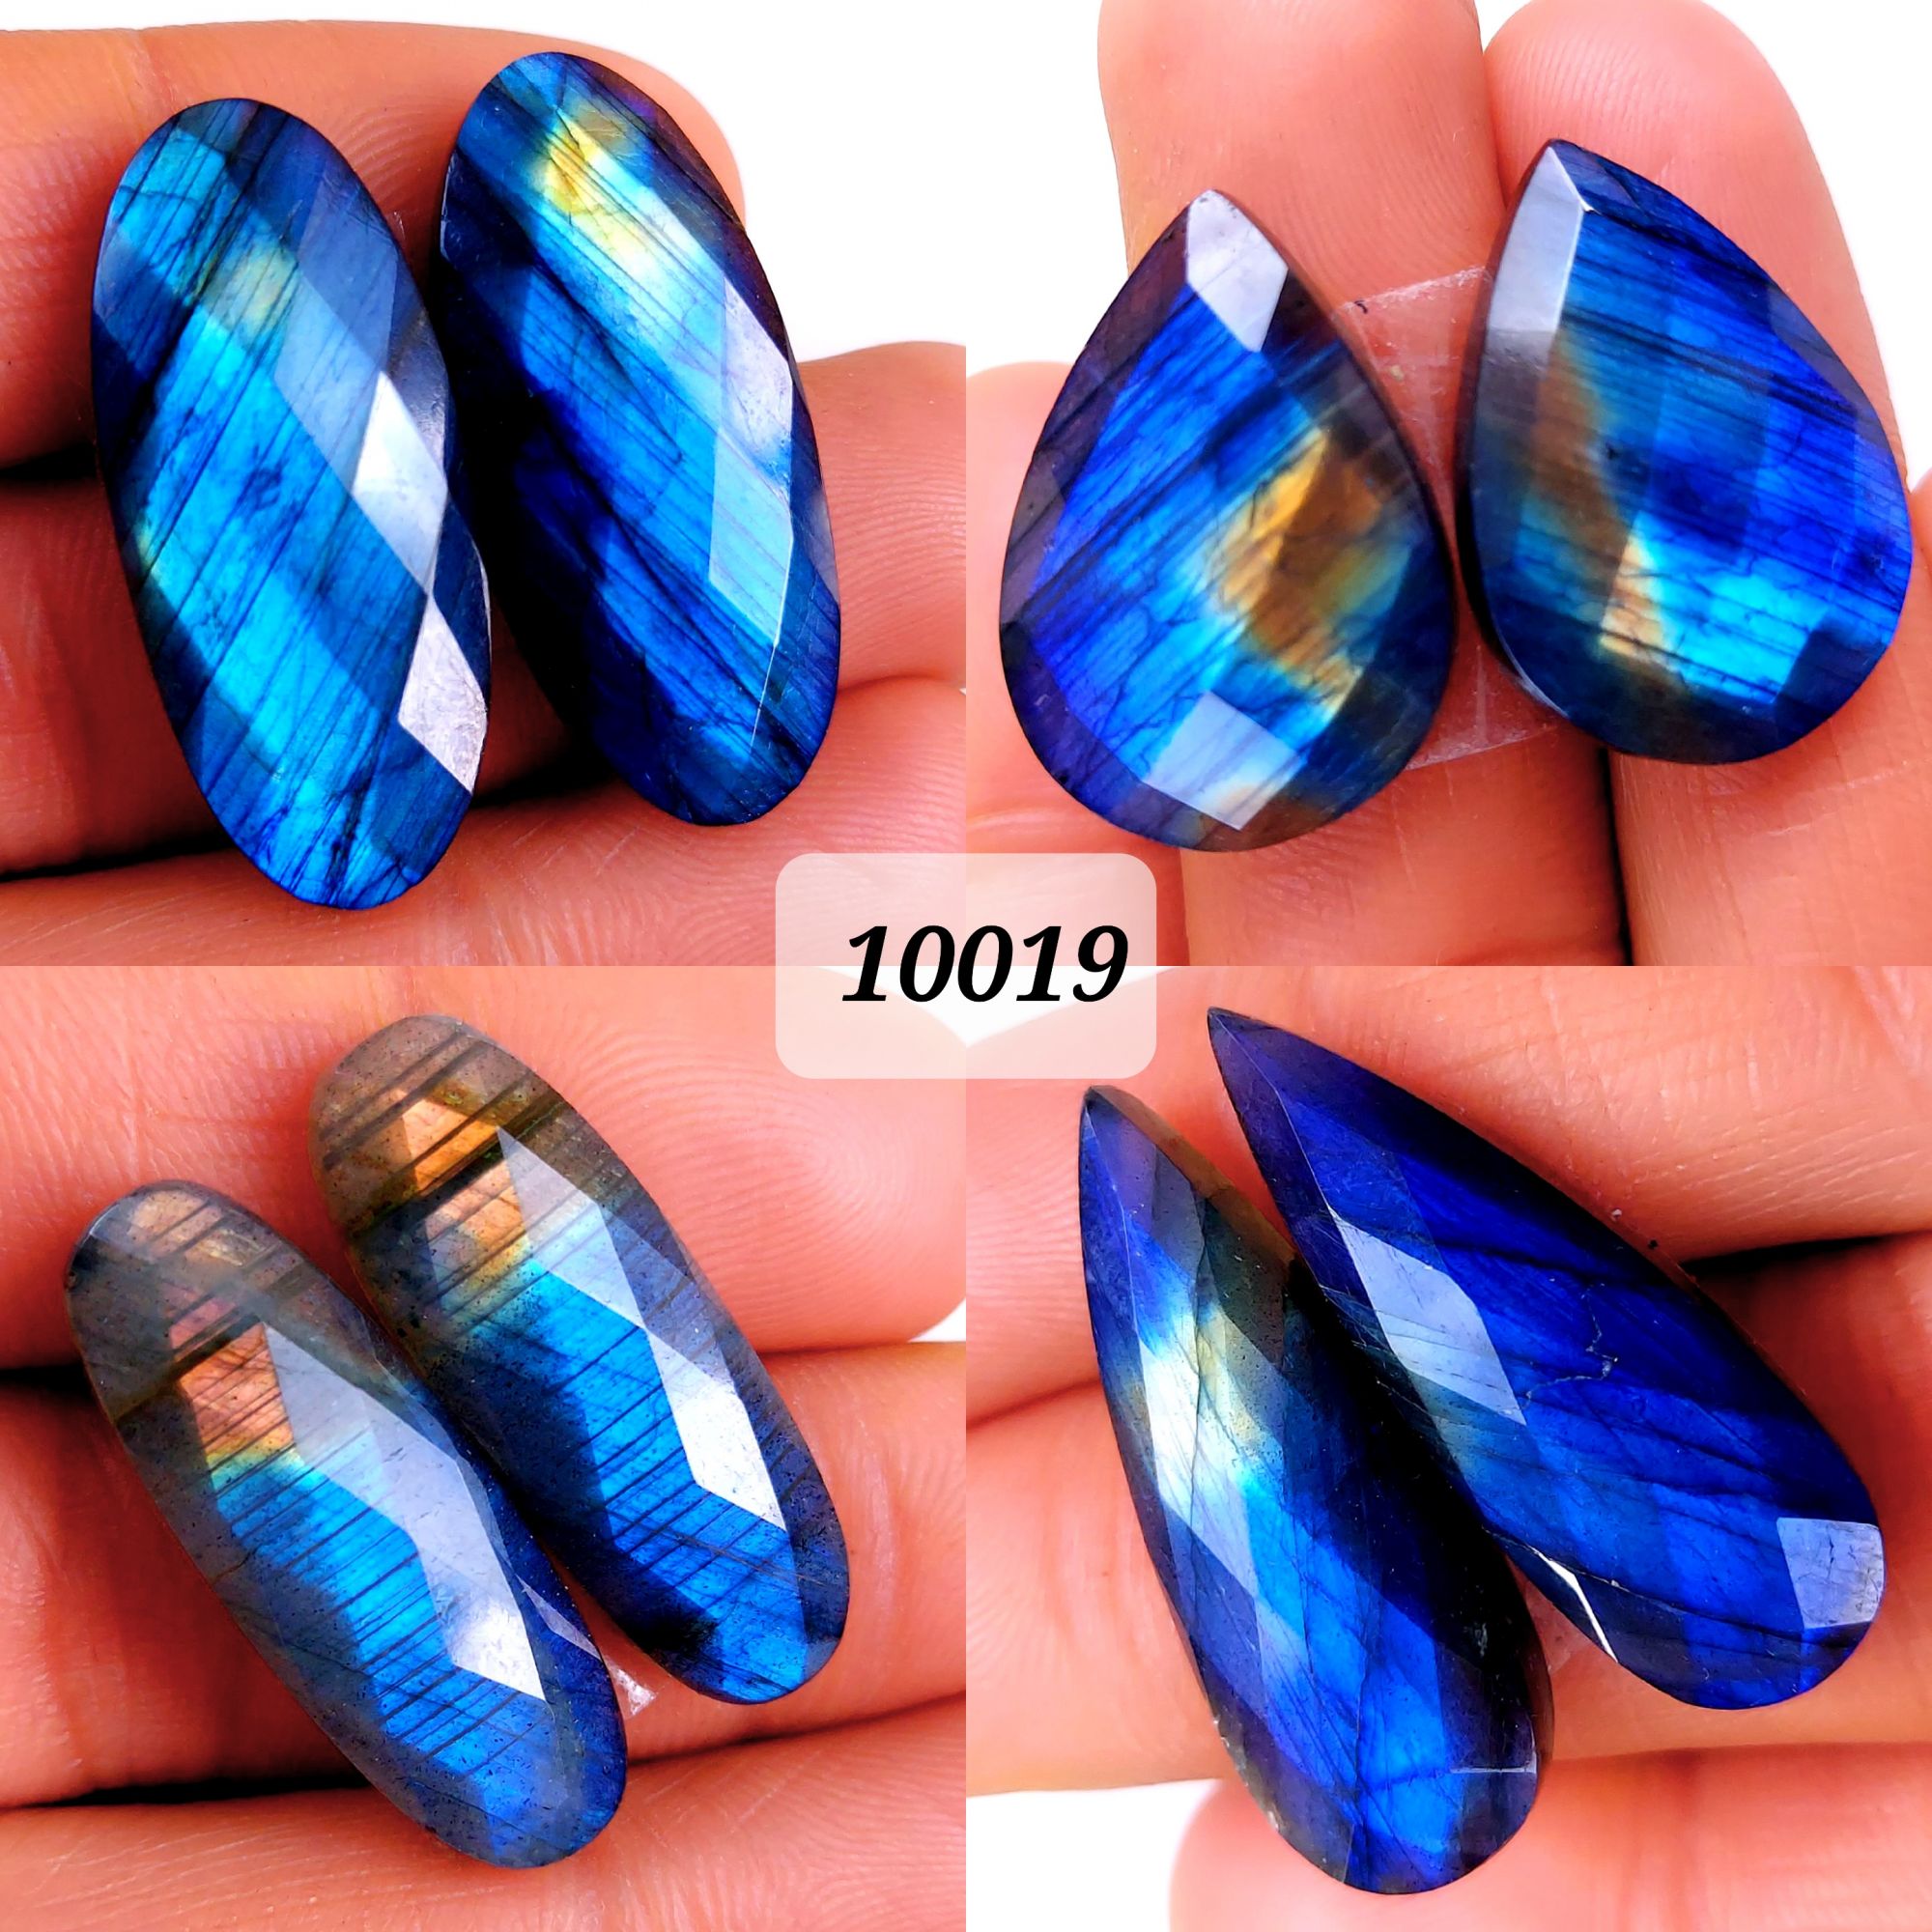 4Pair 144Cts Natural Labradorite Blue Fire Faceted Dangle Drop Earrings Semi Precious Crystal For Hoop Earrings Blue Gemstone Cabochon Matching pair 30x12 25x16mm #10019